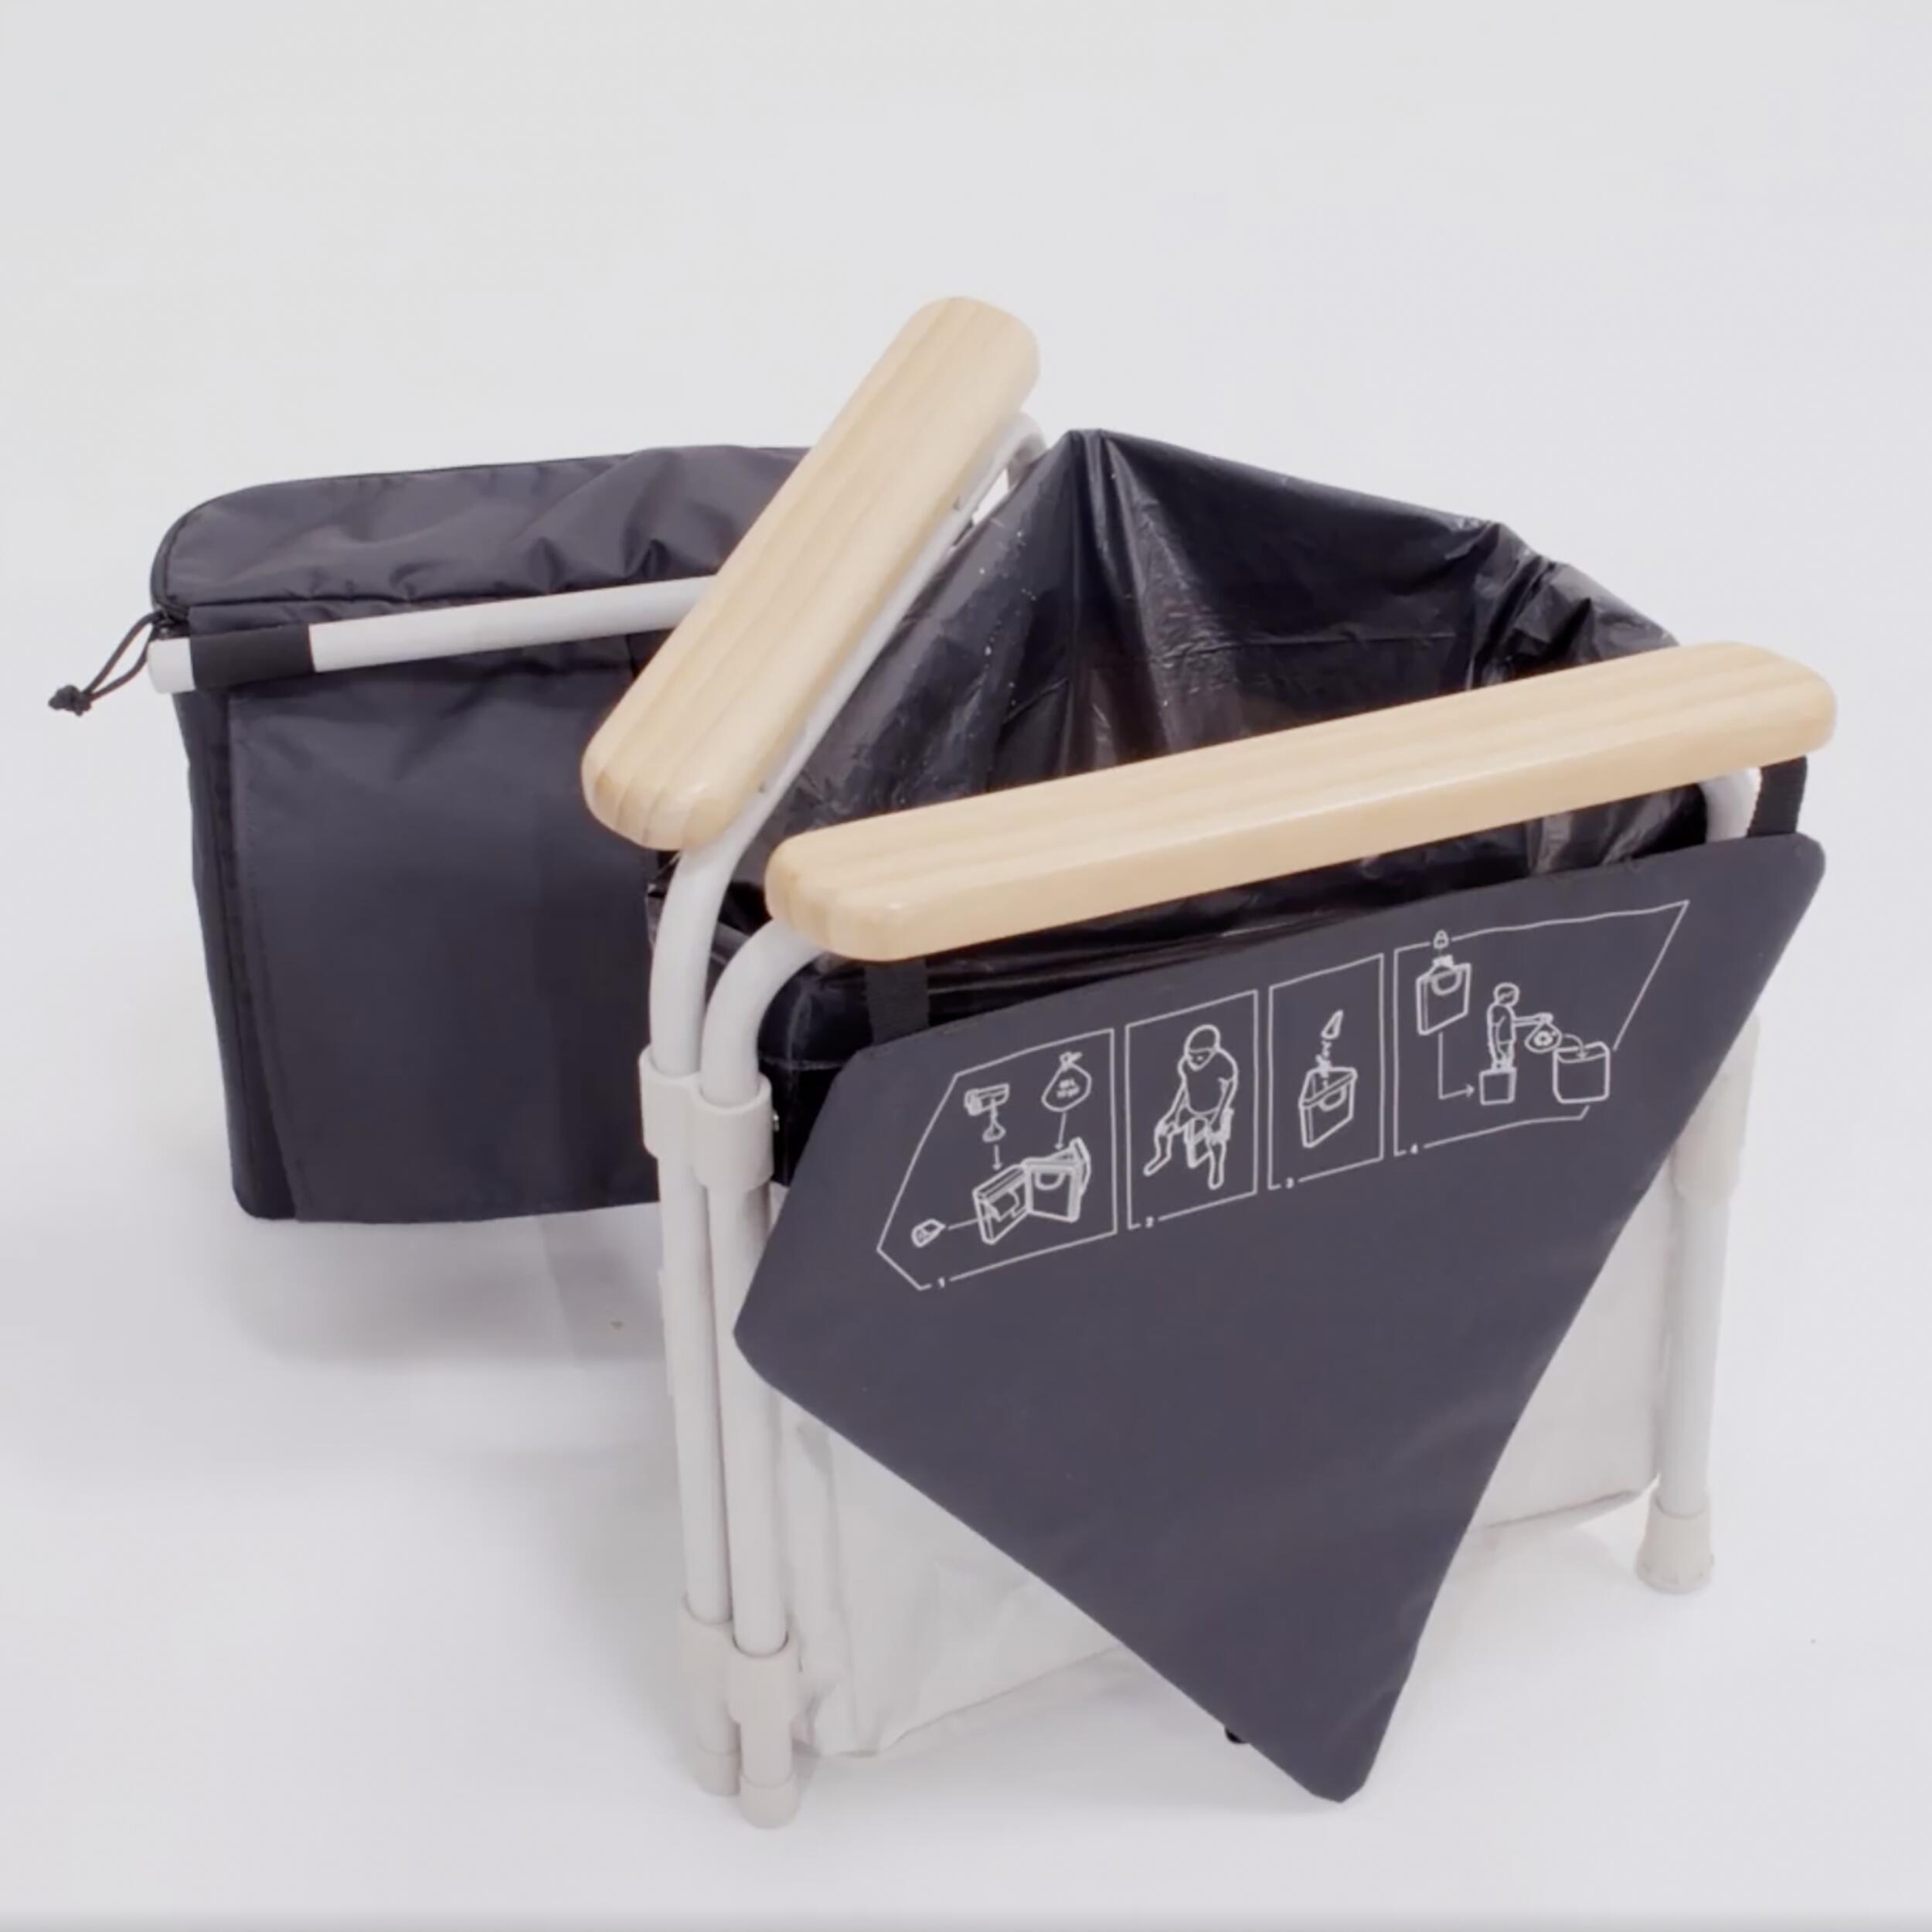 FOLDING DRY TOILETS FOR CAMPING 4/9